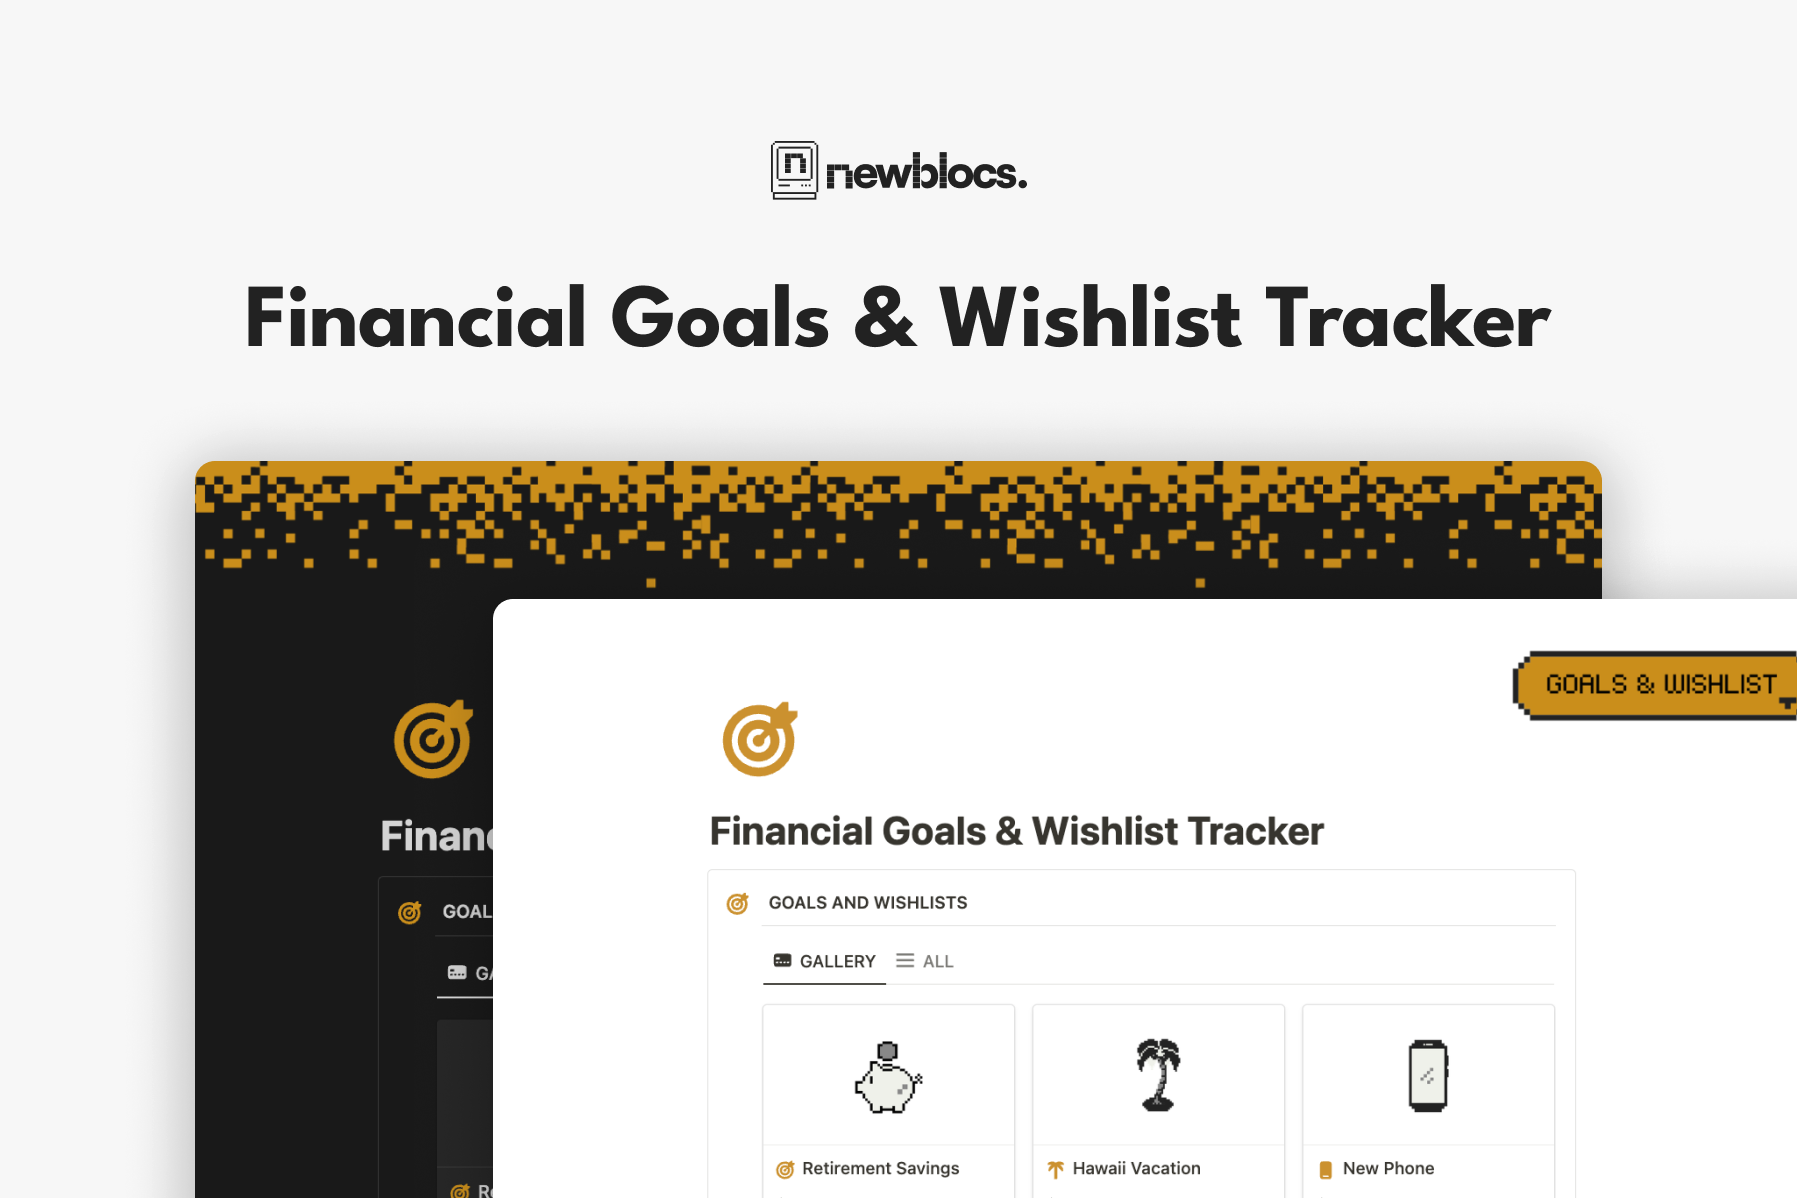 Financial Goals & Wishlists Tracker: Take Control of Your Financial Future 📈